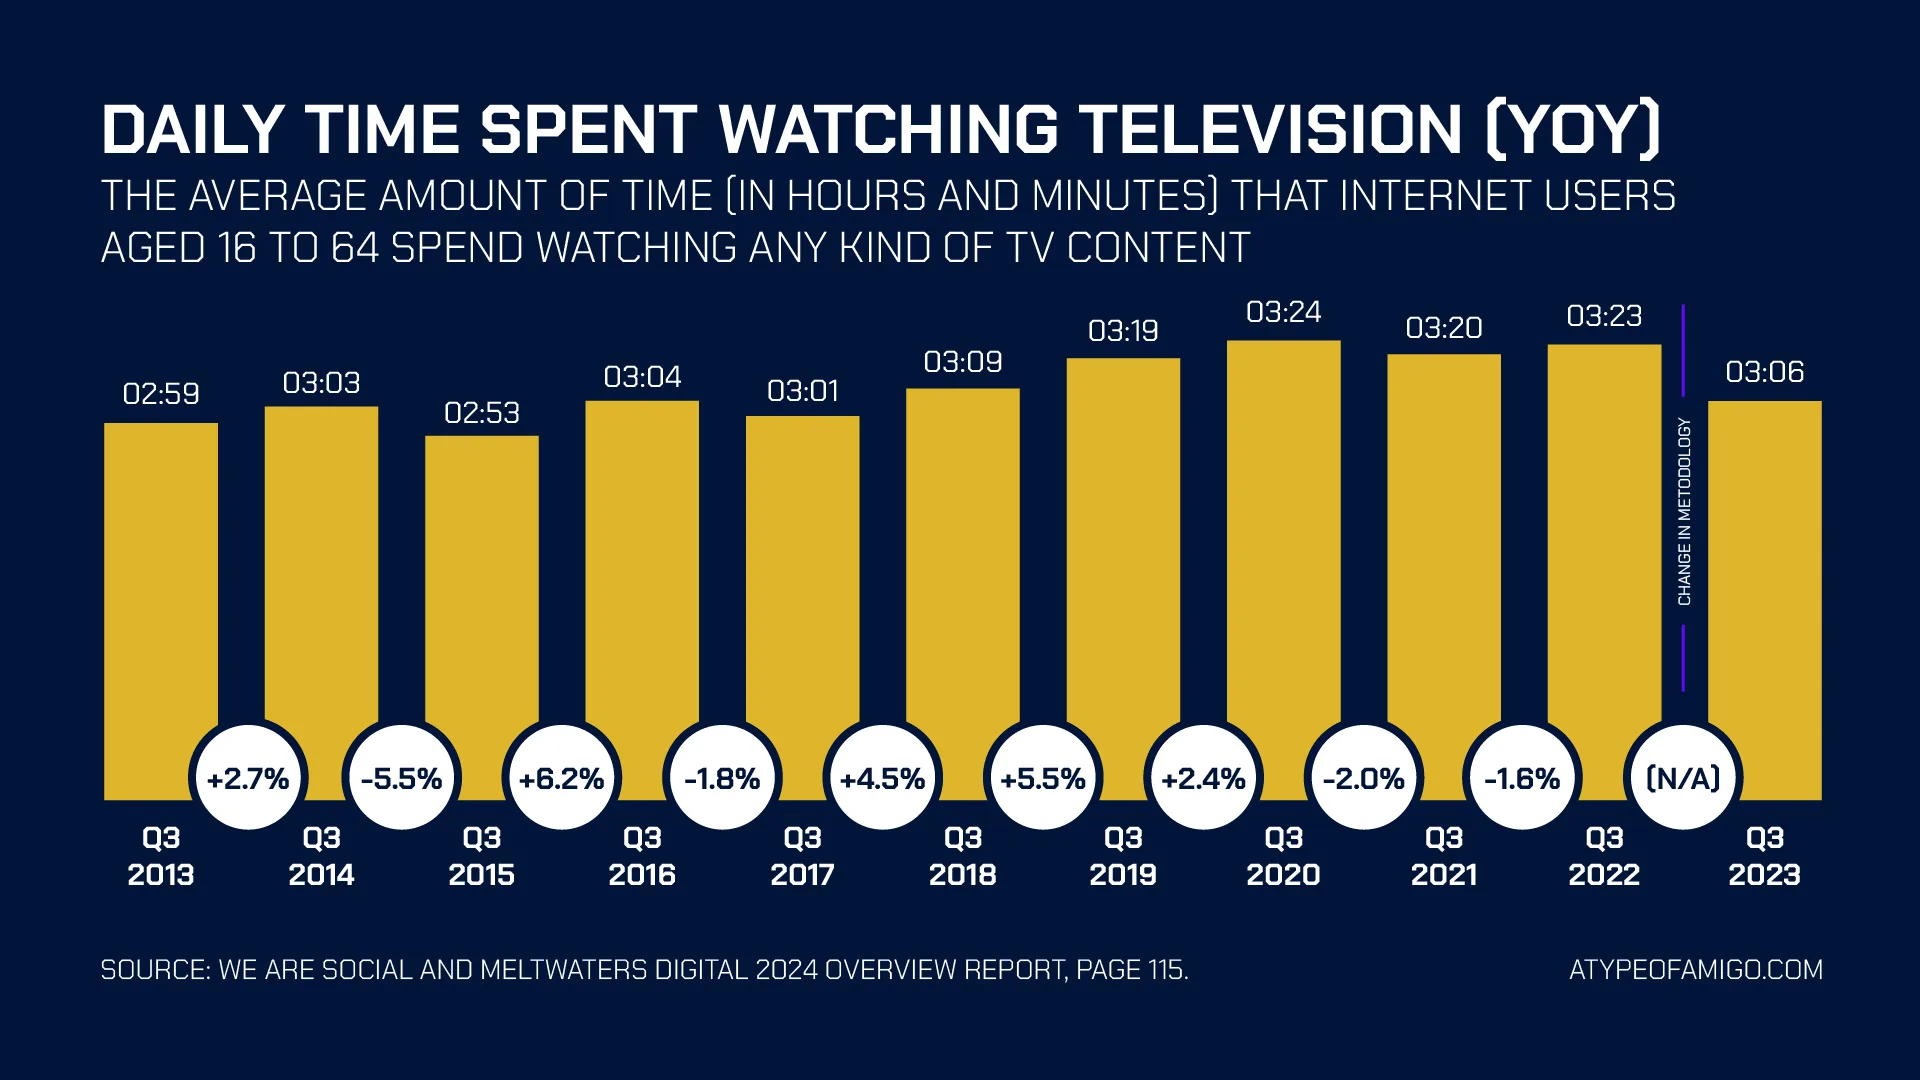 Daily time spent watching television (YOY)